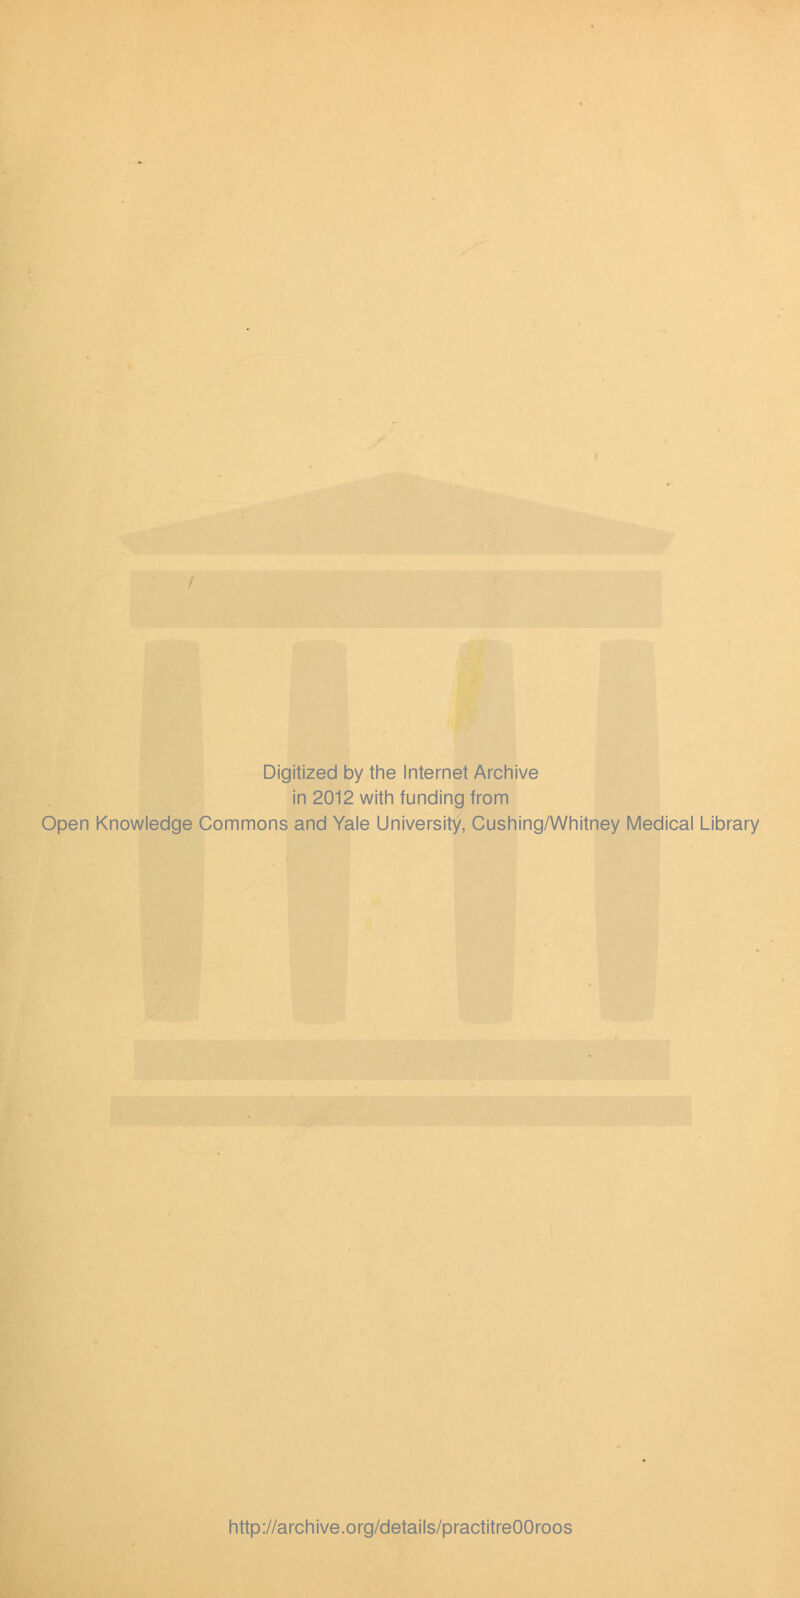 Digitized by tine Internet Arciiive in 2012 witii funding from Open Knowledge Commons and Yale University, Gushing/Whitney Medical Library http://archive.org/details/practitreOOroos